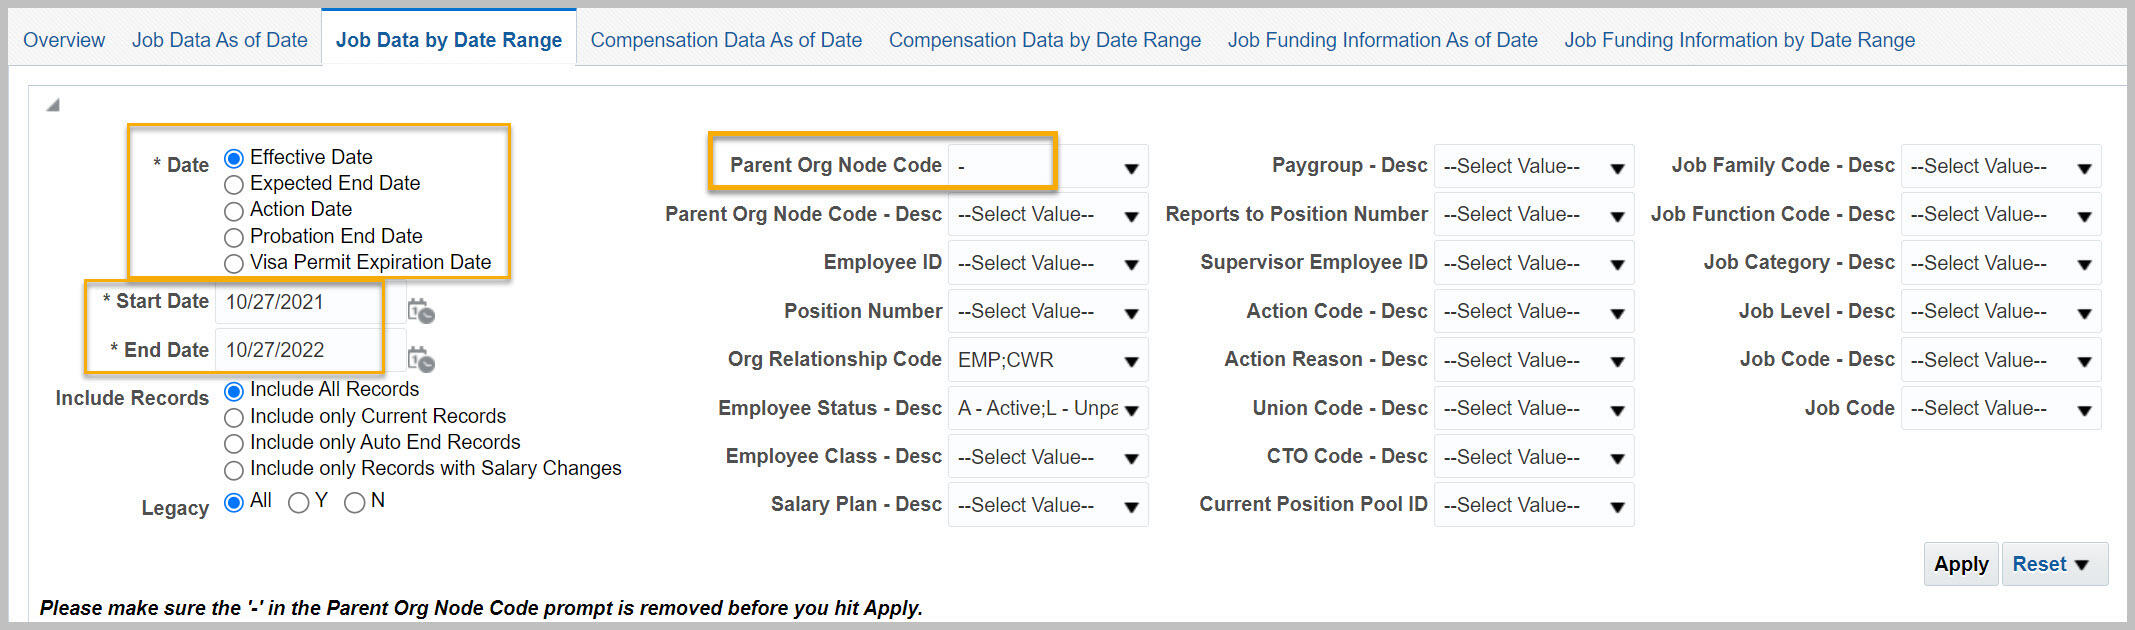 Filters for Workforce Detail, Job Data by Date Range